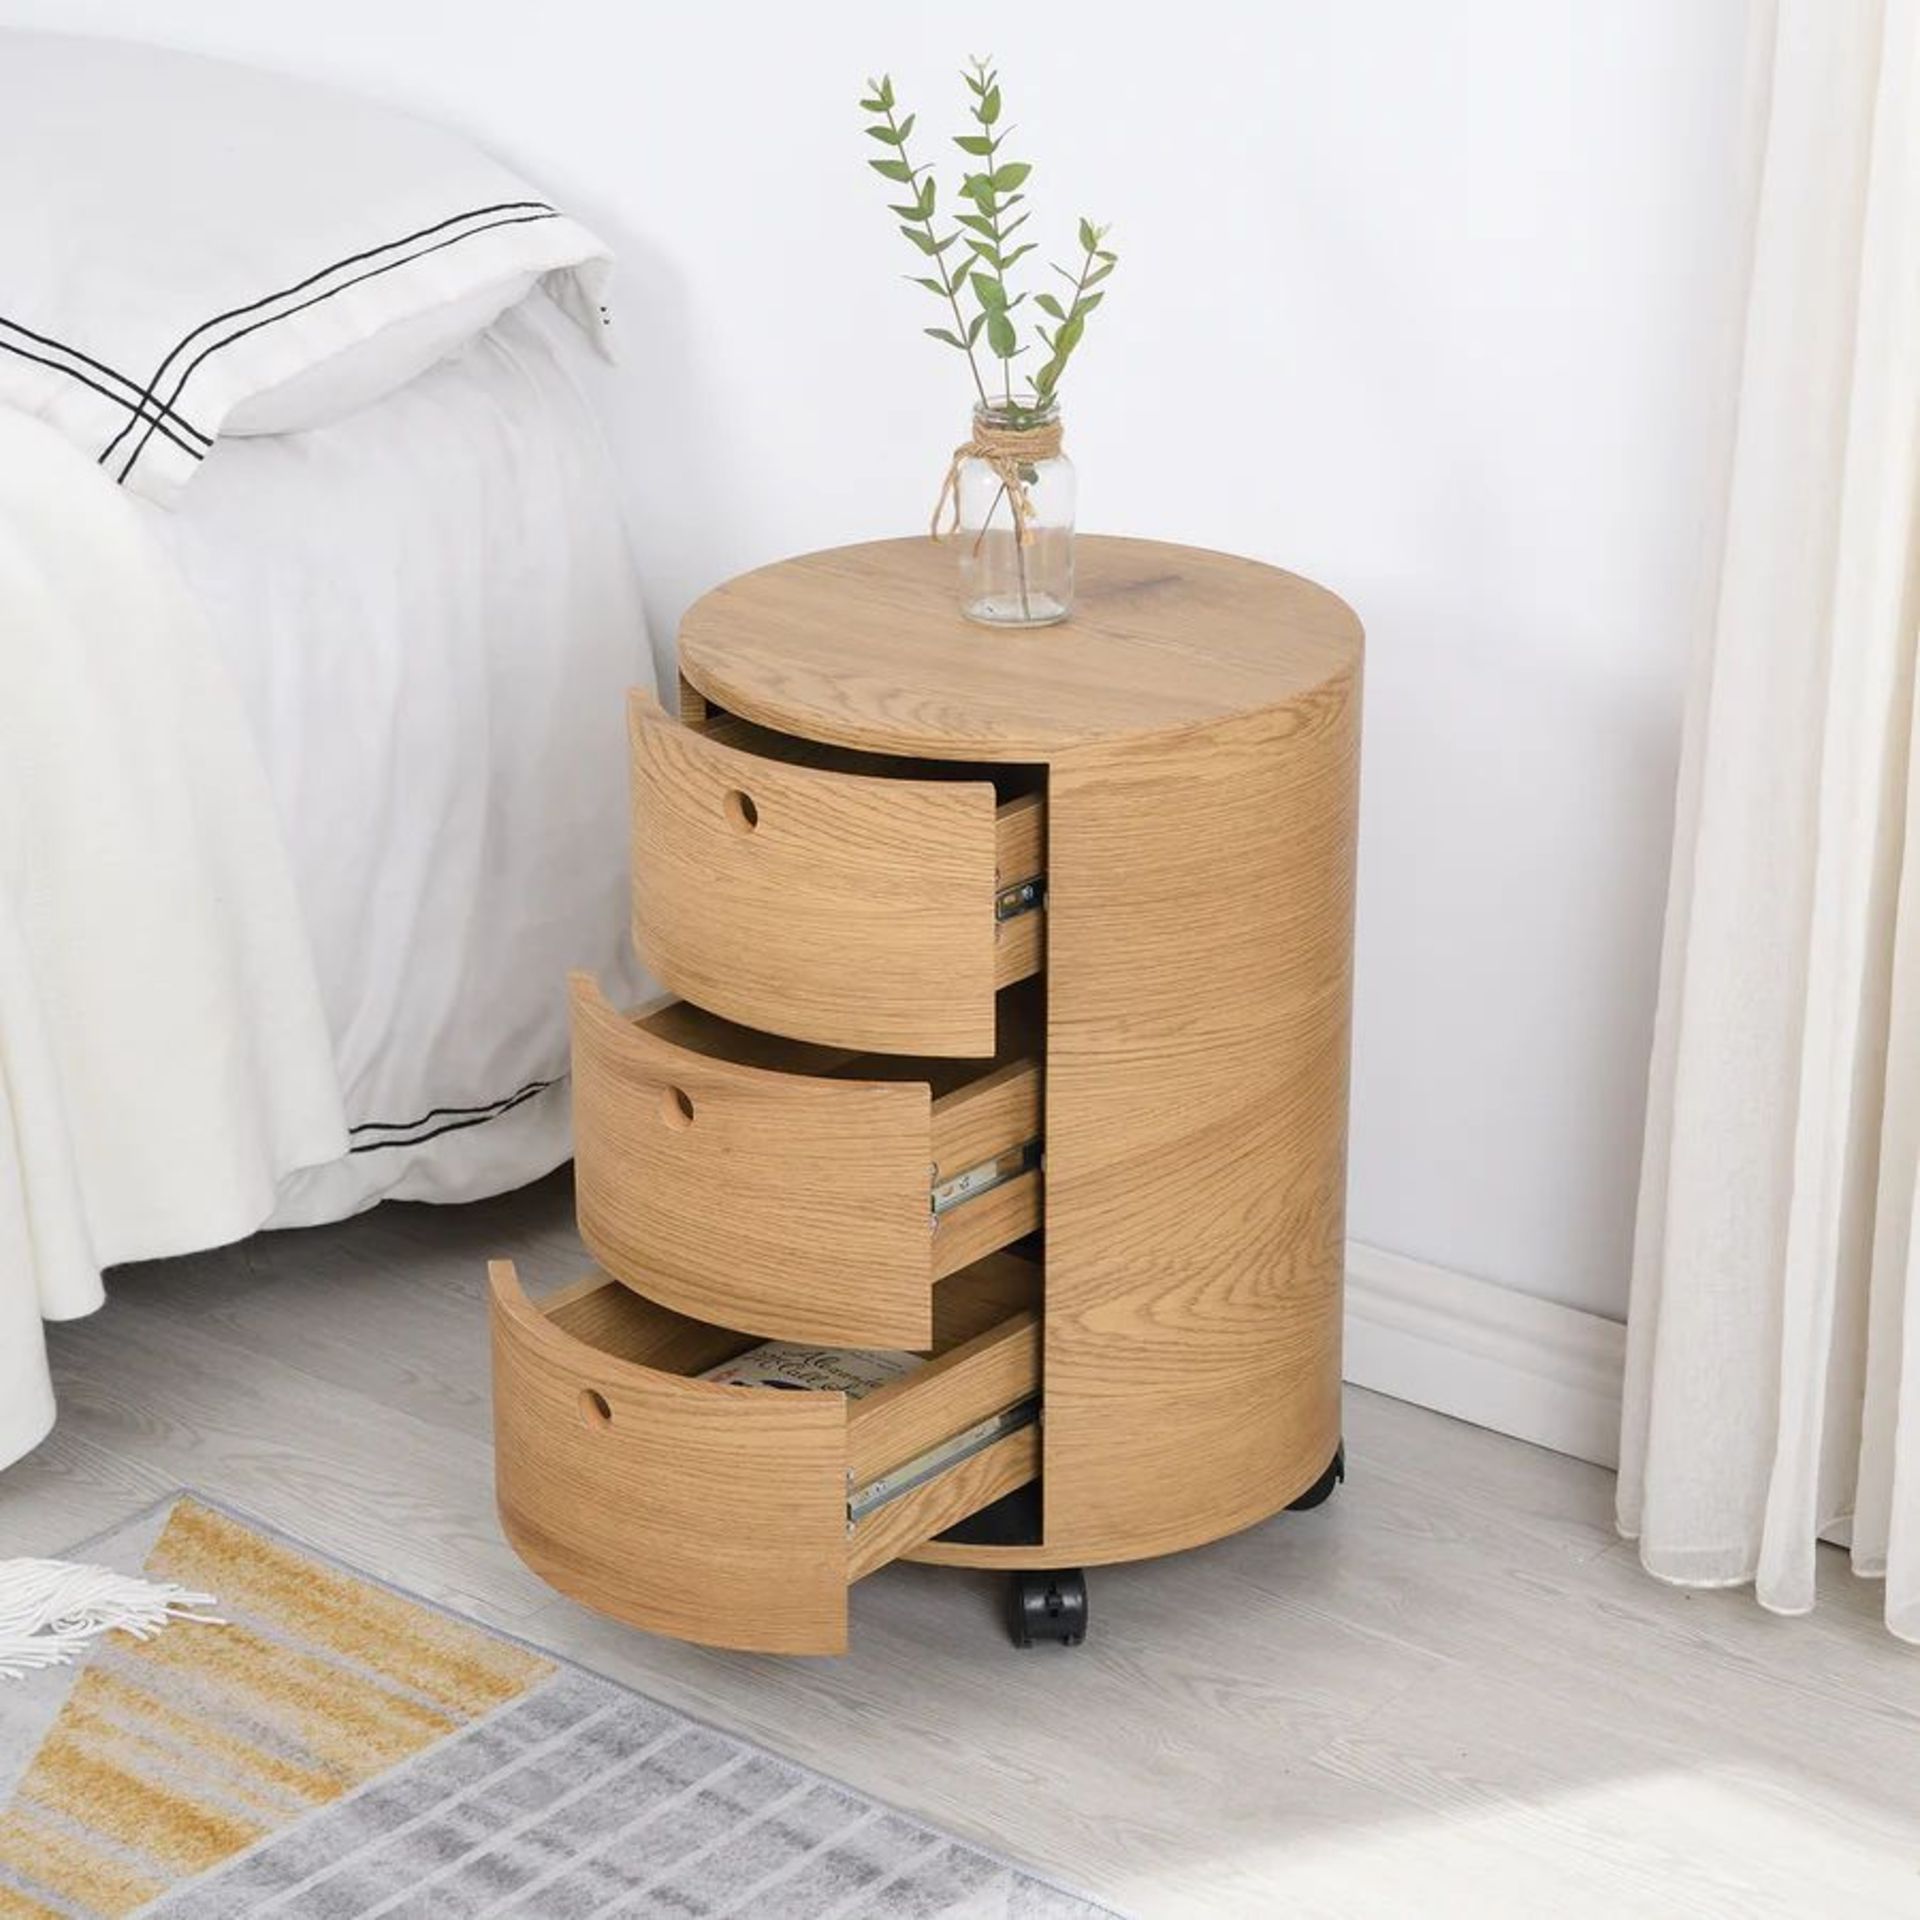 DOLIO Drum Chest Bedside Table, Barrel Side Table with Drawers Oak 3 Drawer. - R19.1. RRP £219.99. - Bild 2 aus 2